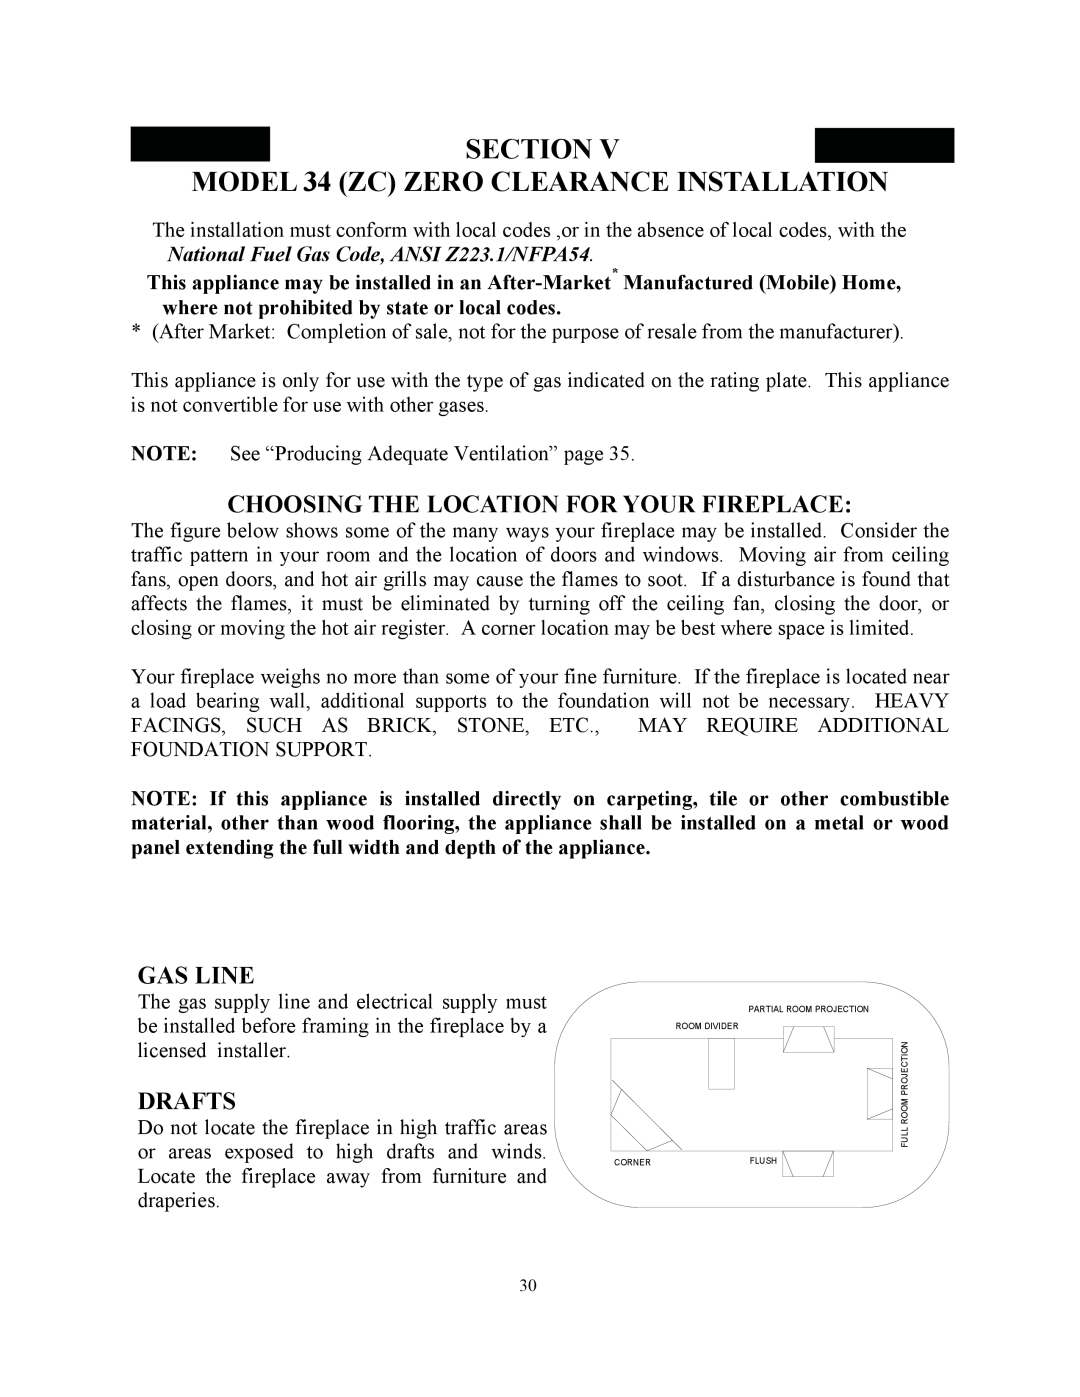 New Buck Corporation manual SECTION V MODEL 34 ZC ZERO CLEARANCE INSTALLATION, Choosing The Location For Your Fireplace 